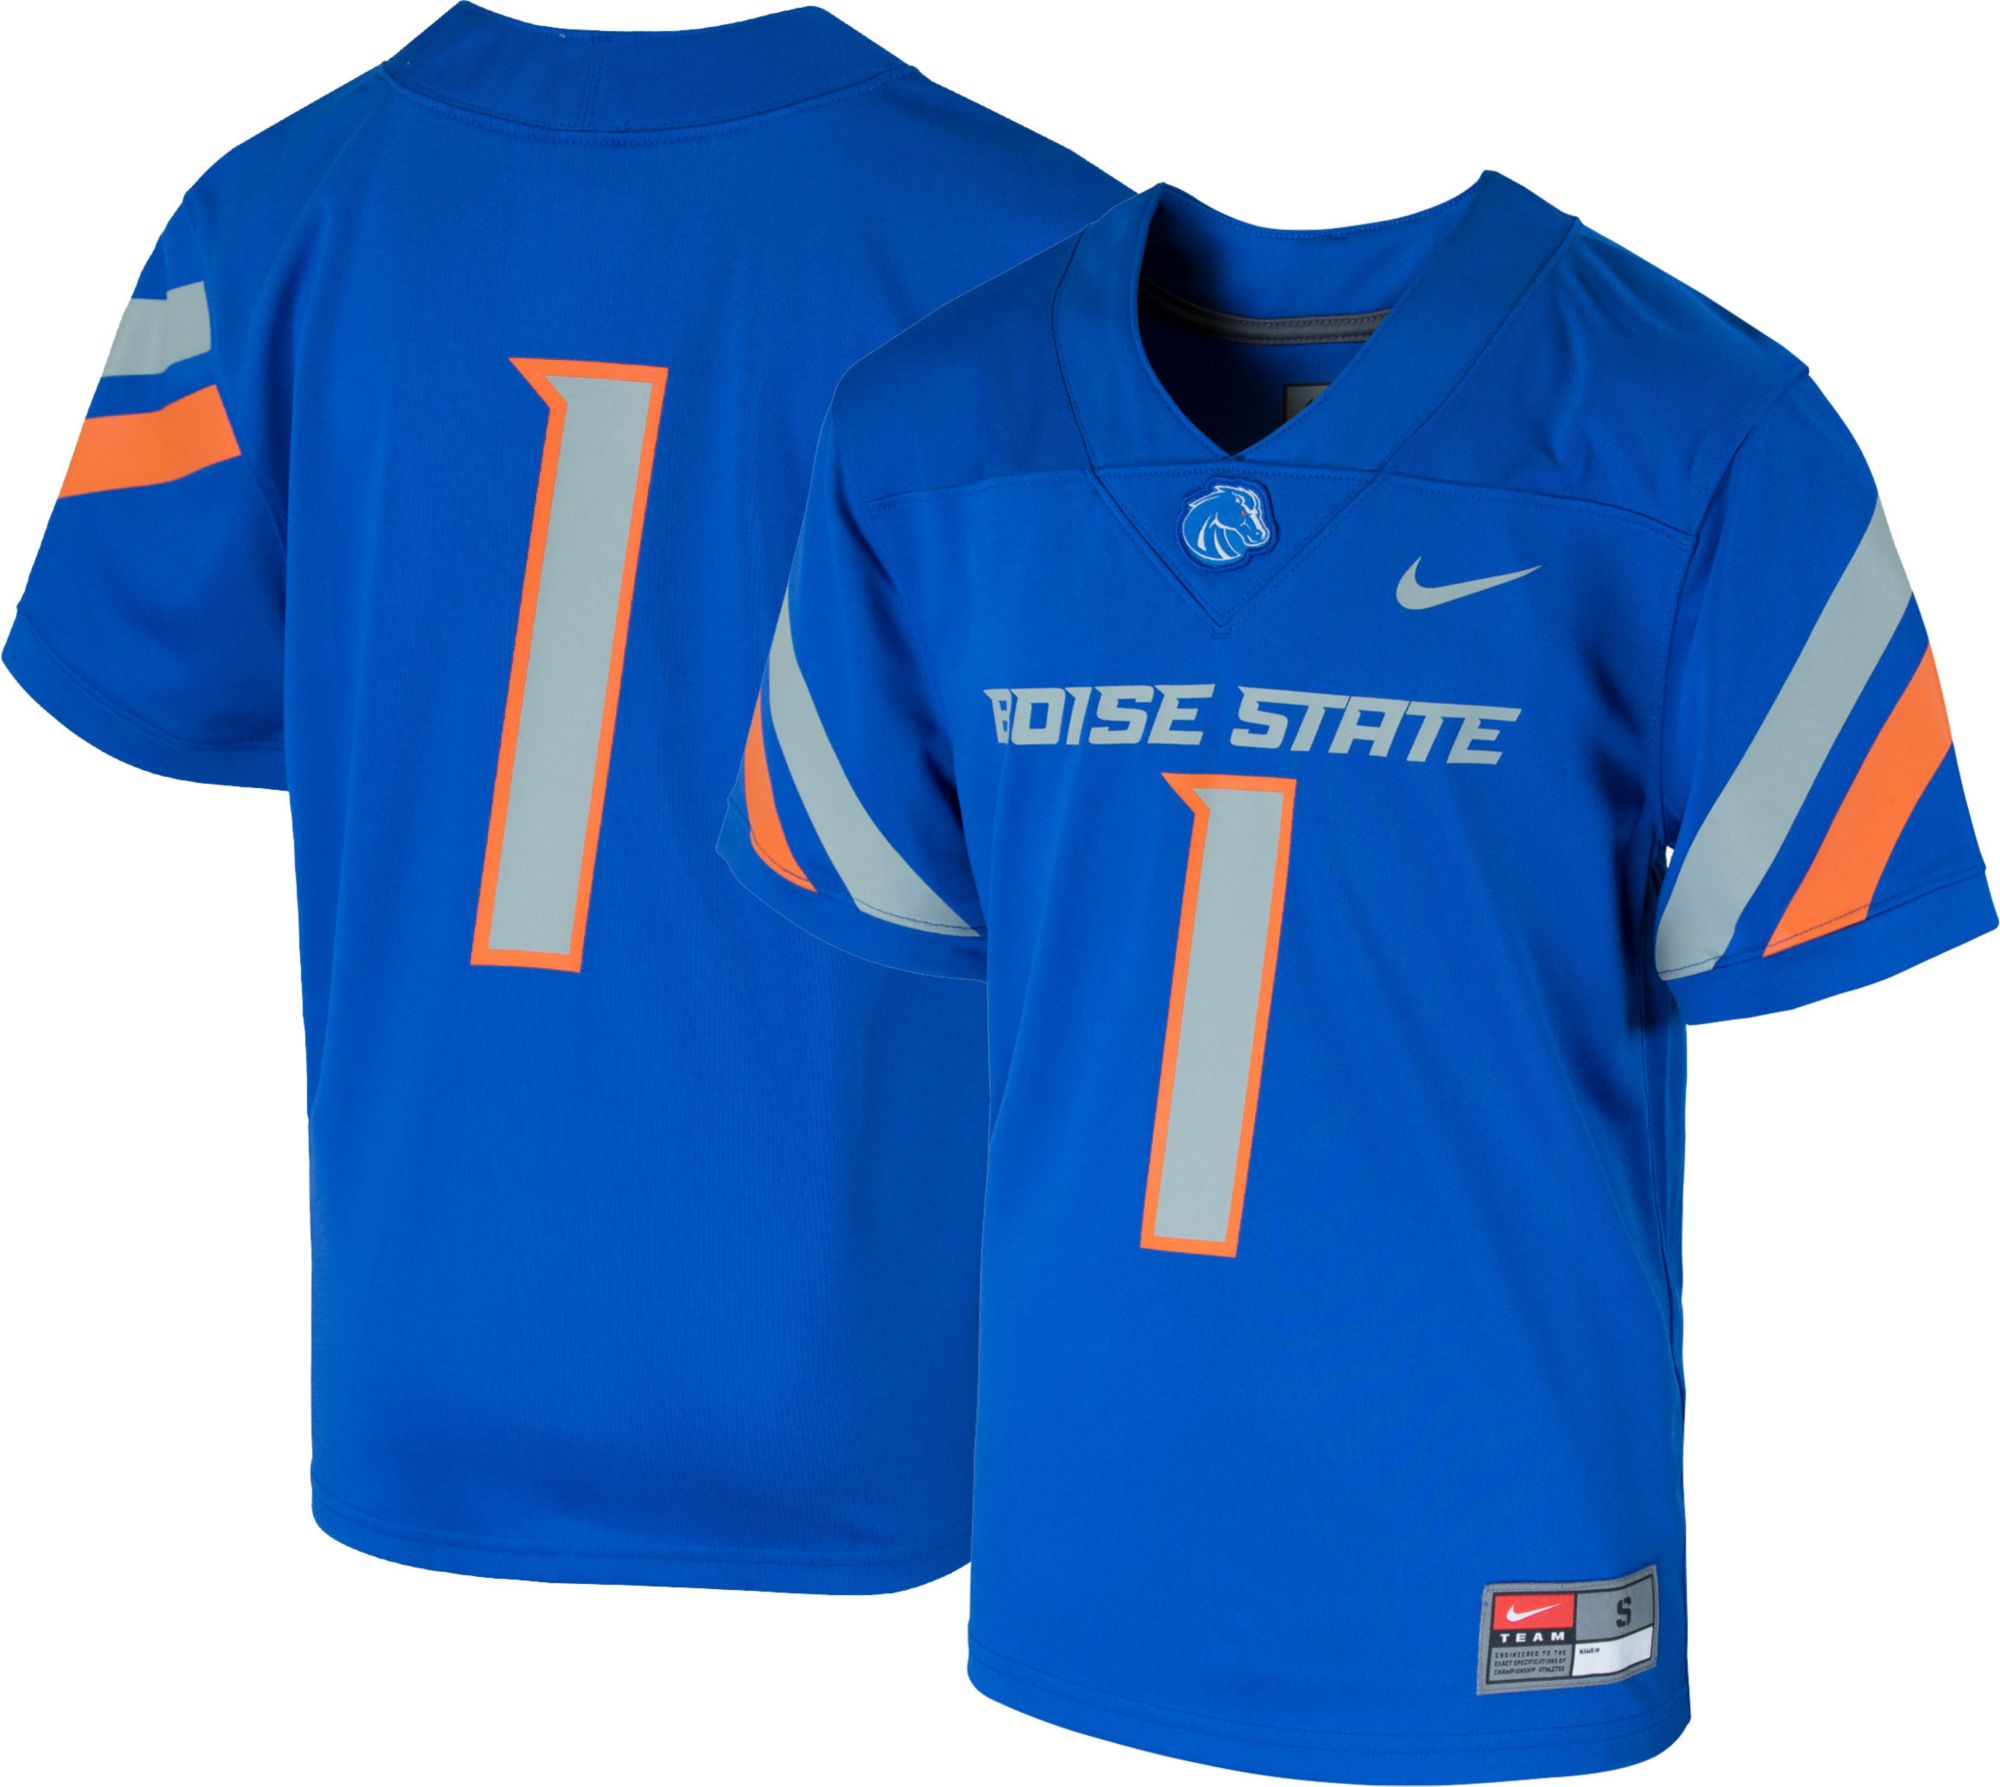 boise state football jersey